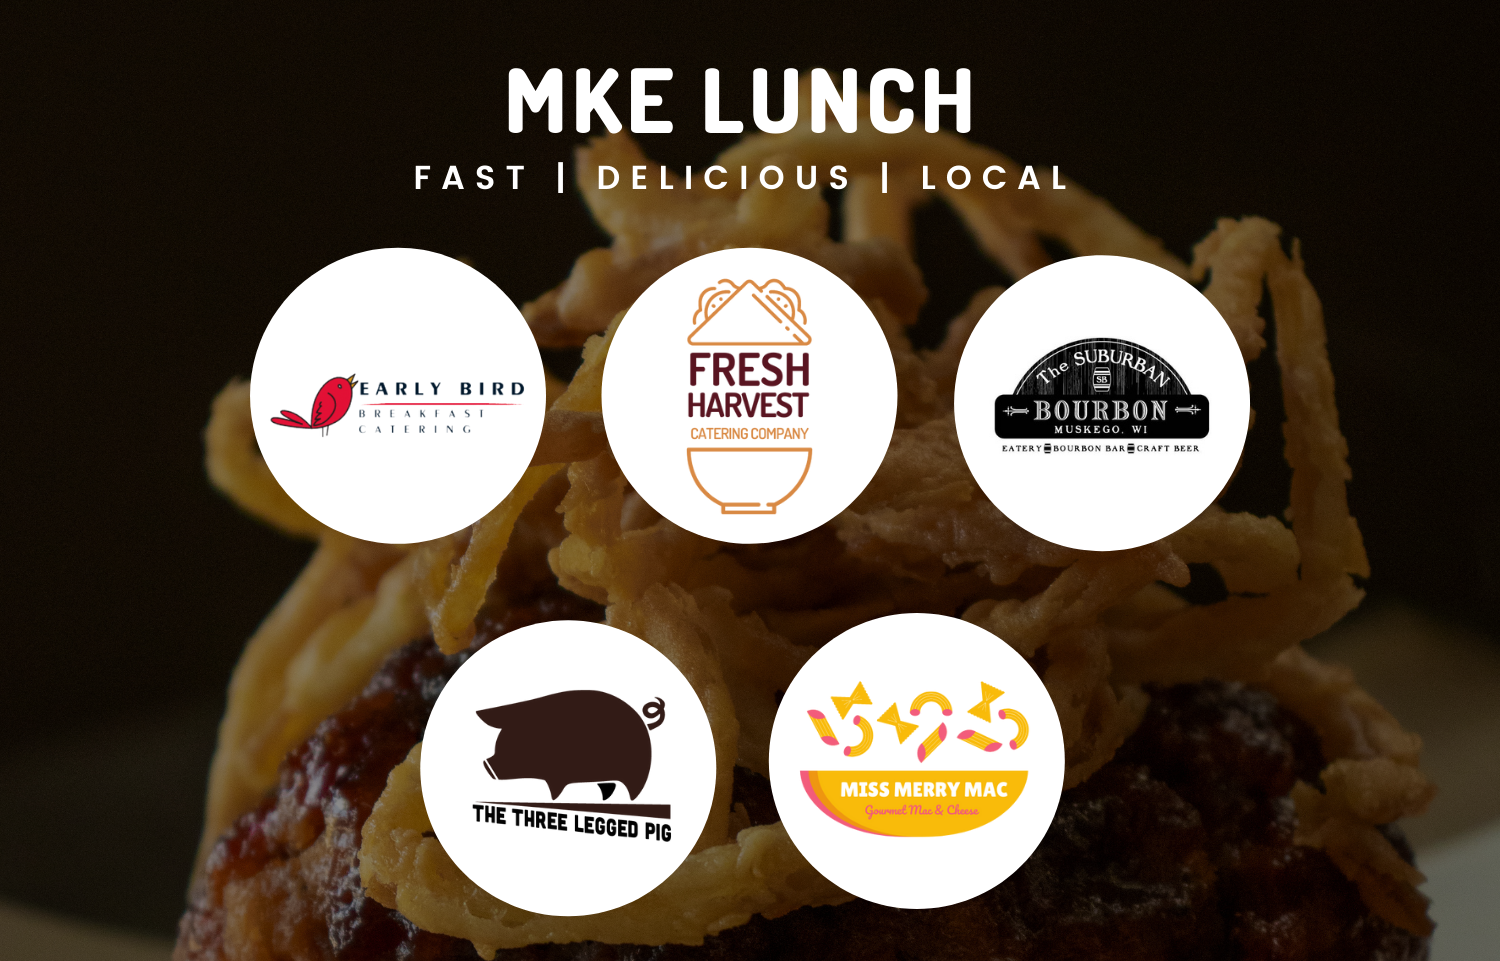 The Best Milwaukee Catering Company for Office Lunches